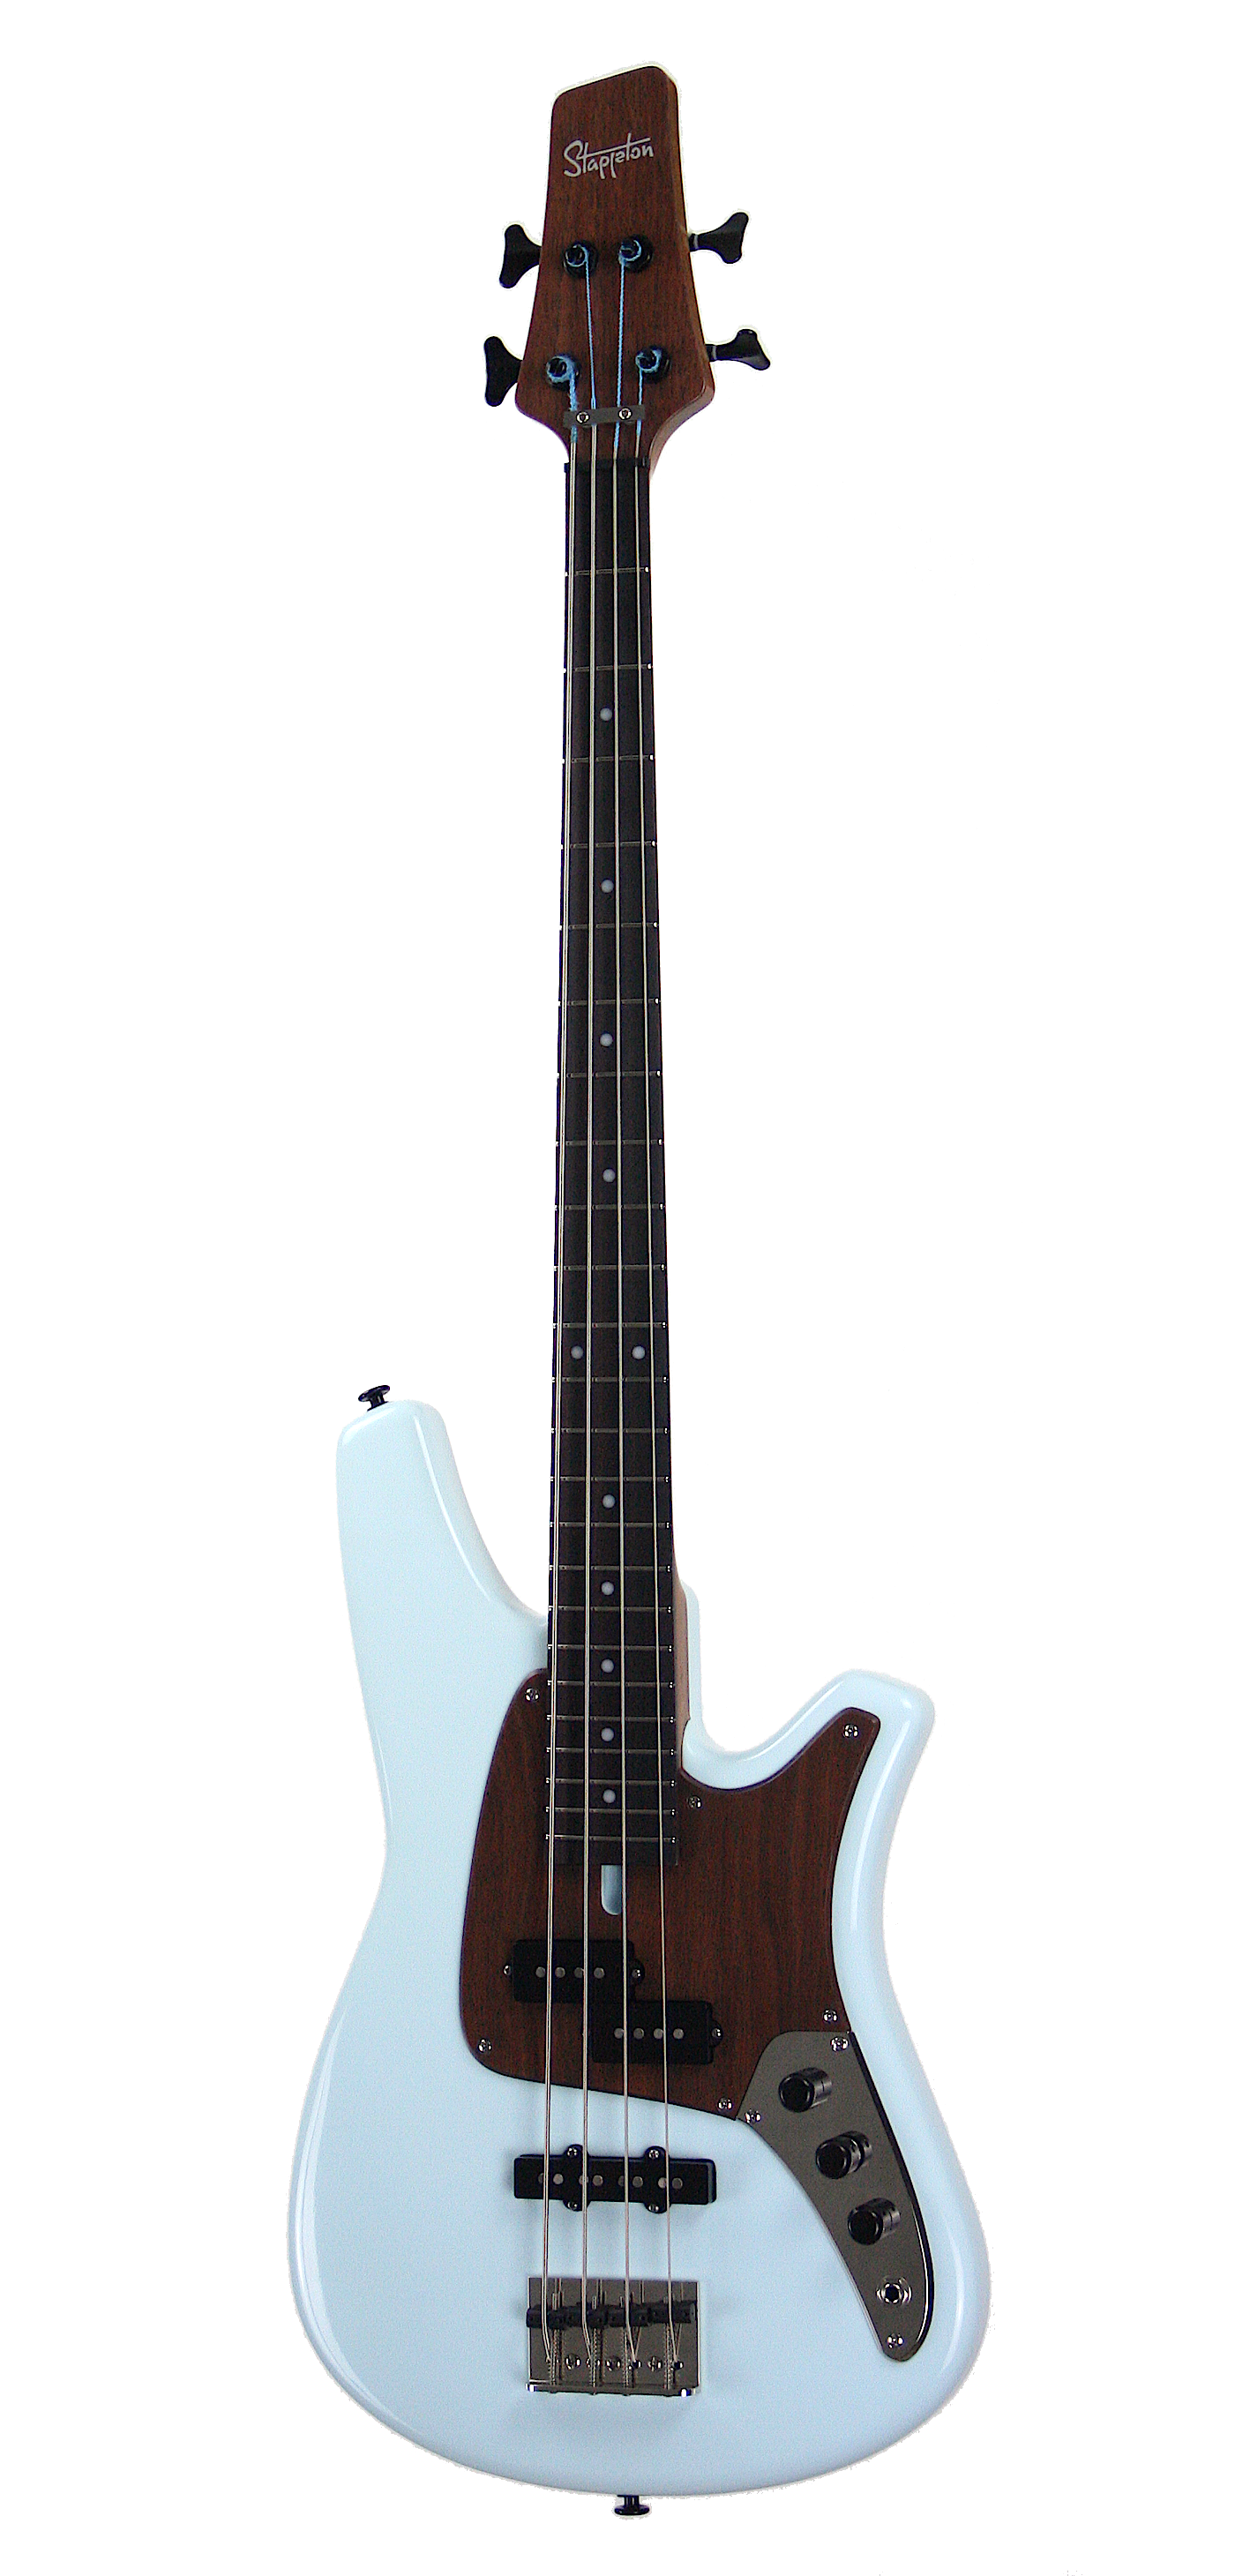 ROLLY™ Bass Guitar. Sky blue. Ash body, rosewood neck and fingerboard.